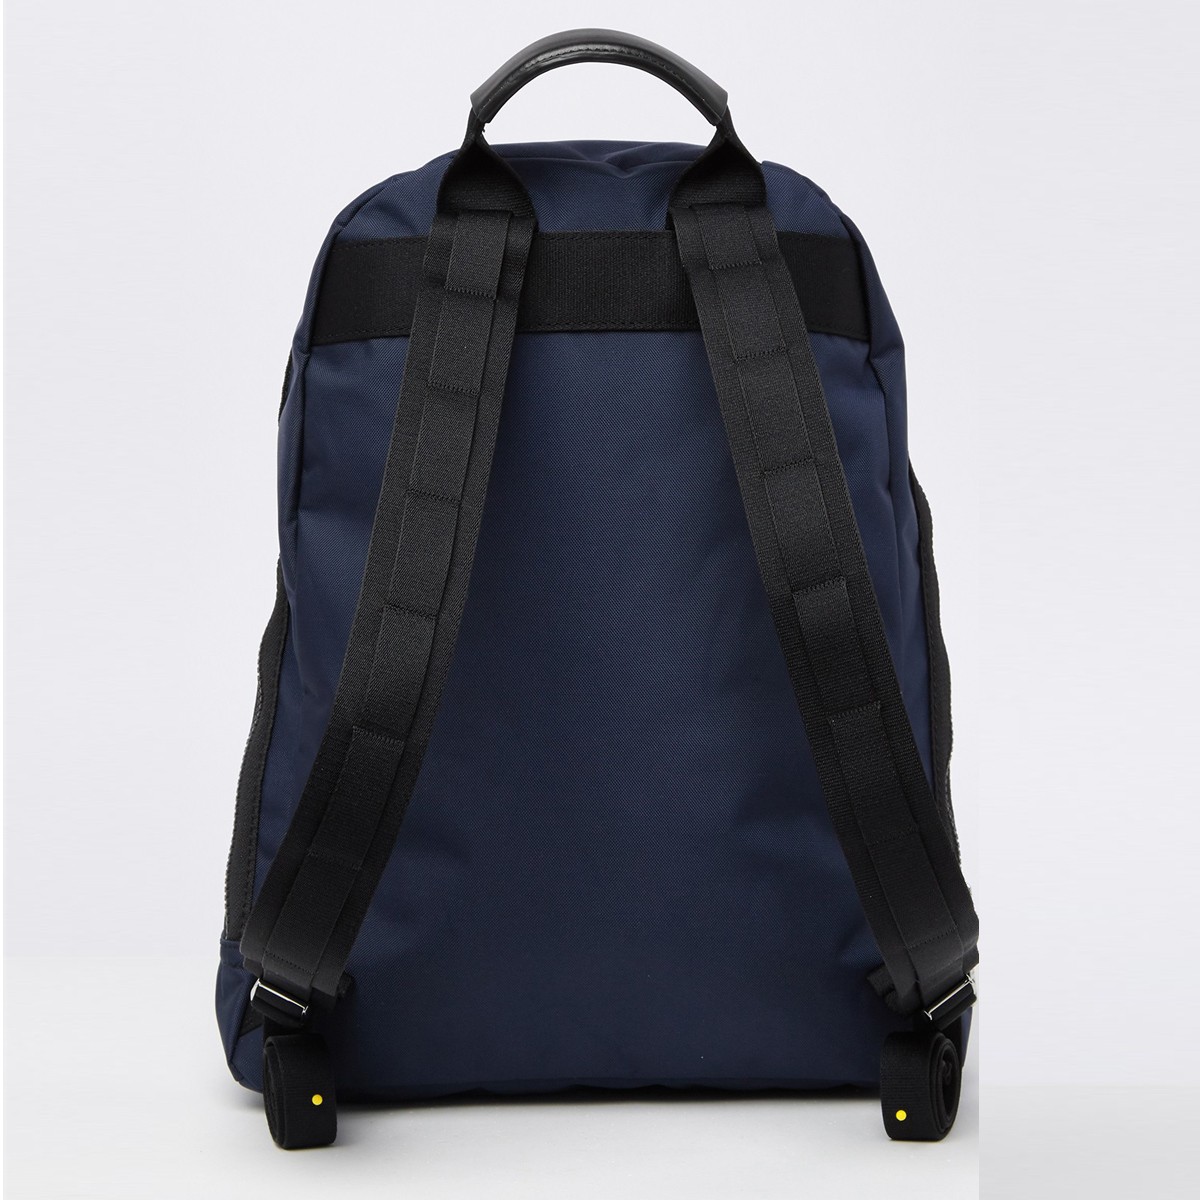 Marc Jacobs マークジェイコブス ALL Star Backpack バックパック